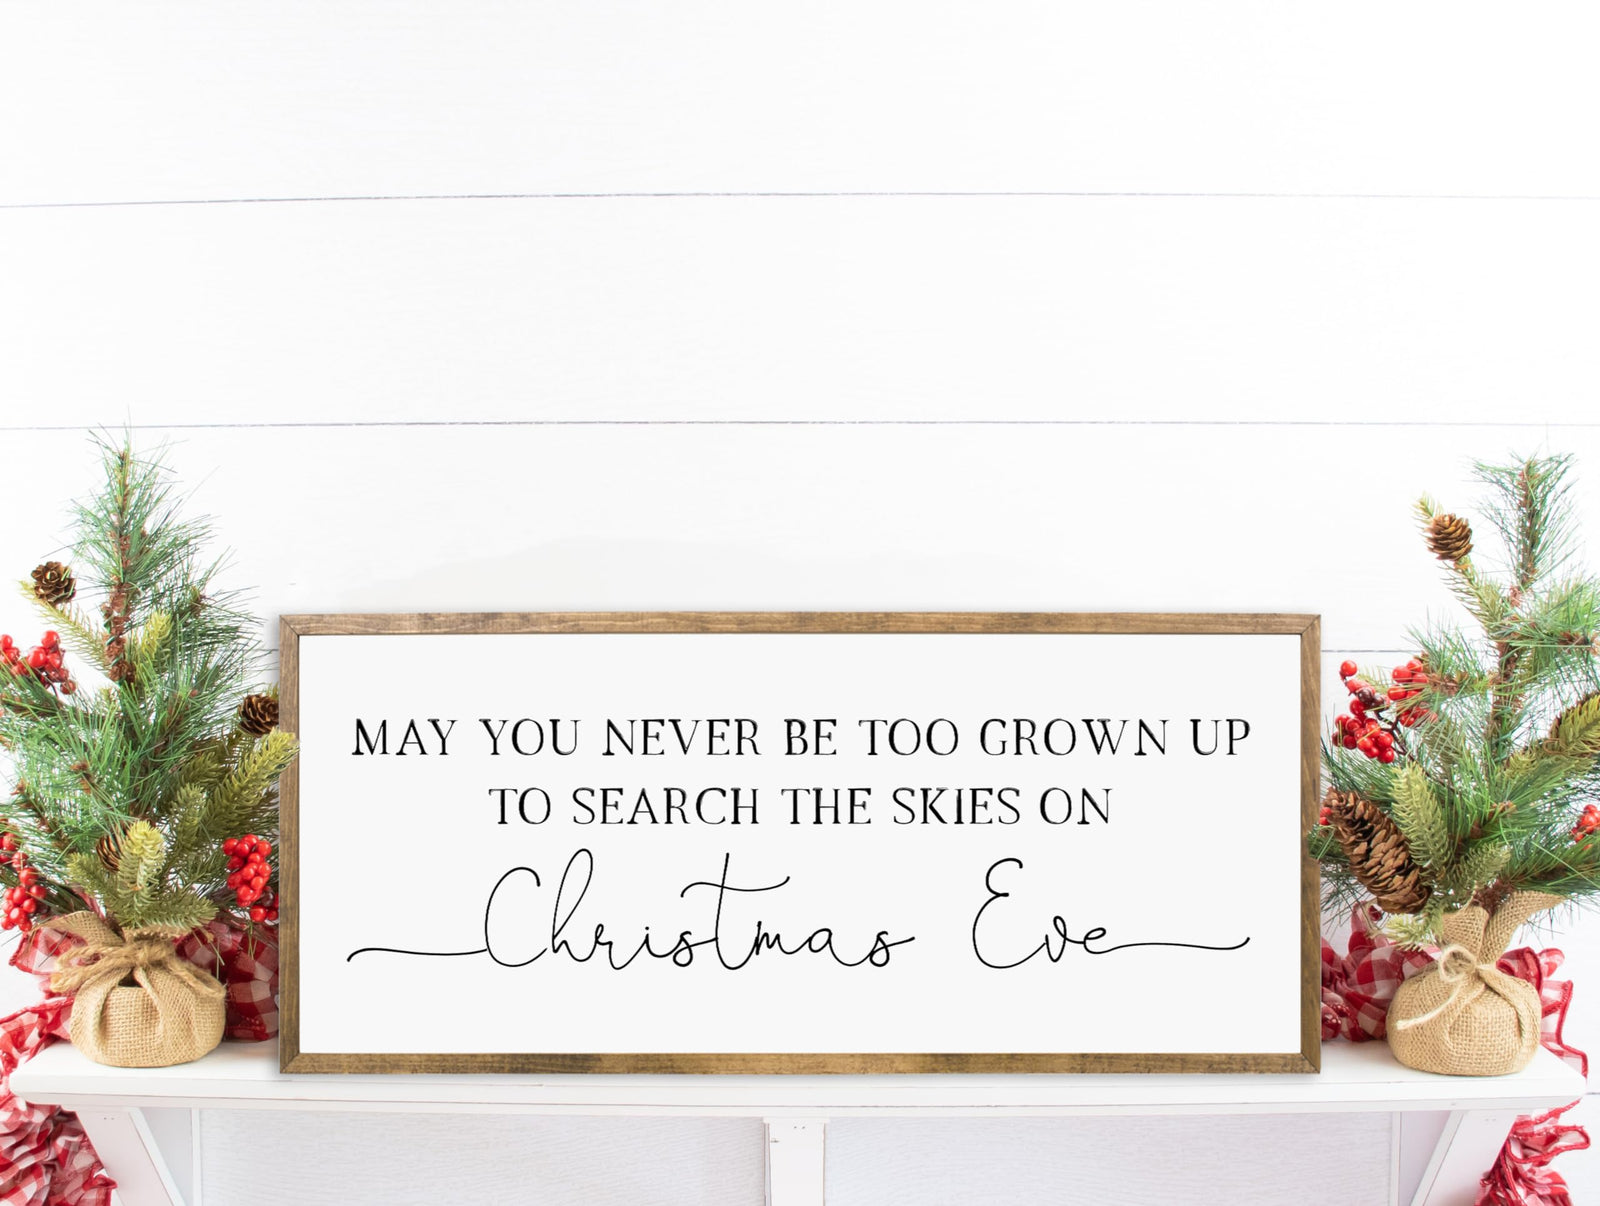 10x20 inches, May you never be too grown up to search the skies on Christmas Eve | Christmas decor | Christmas room decor | Christmas wall decor | Farmhouse Christmas decor